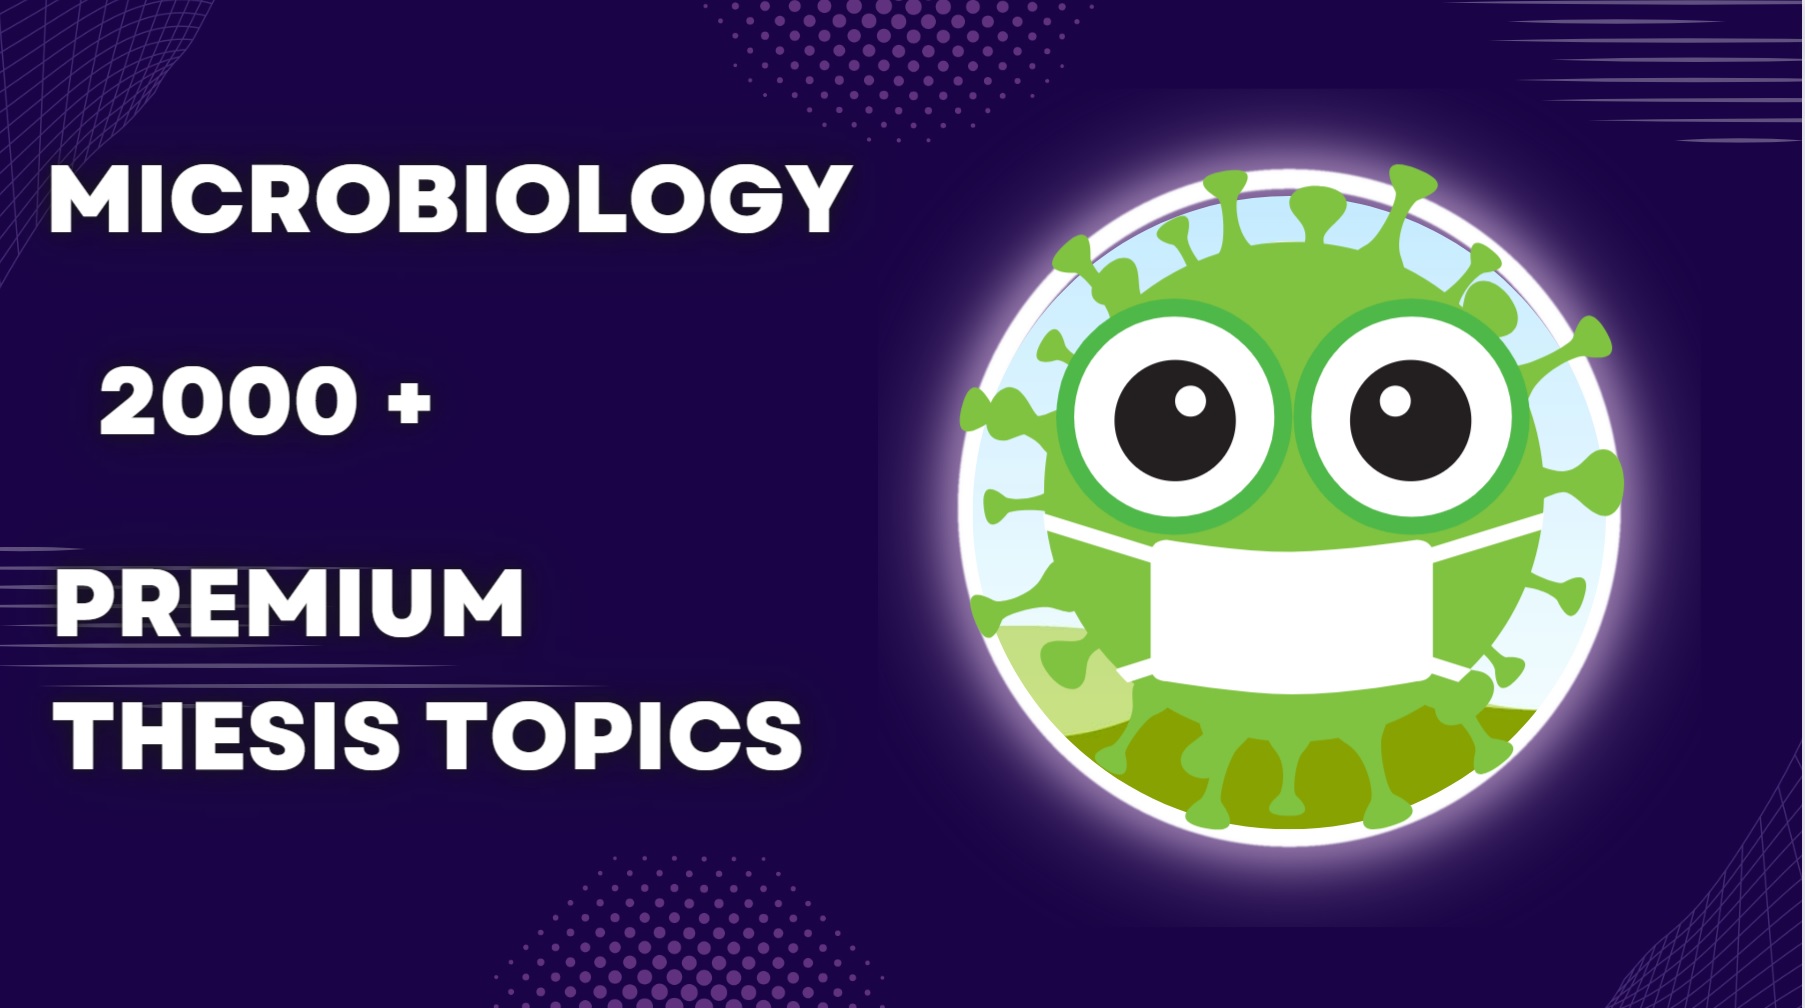 md microbiology thesis topics